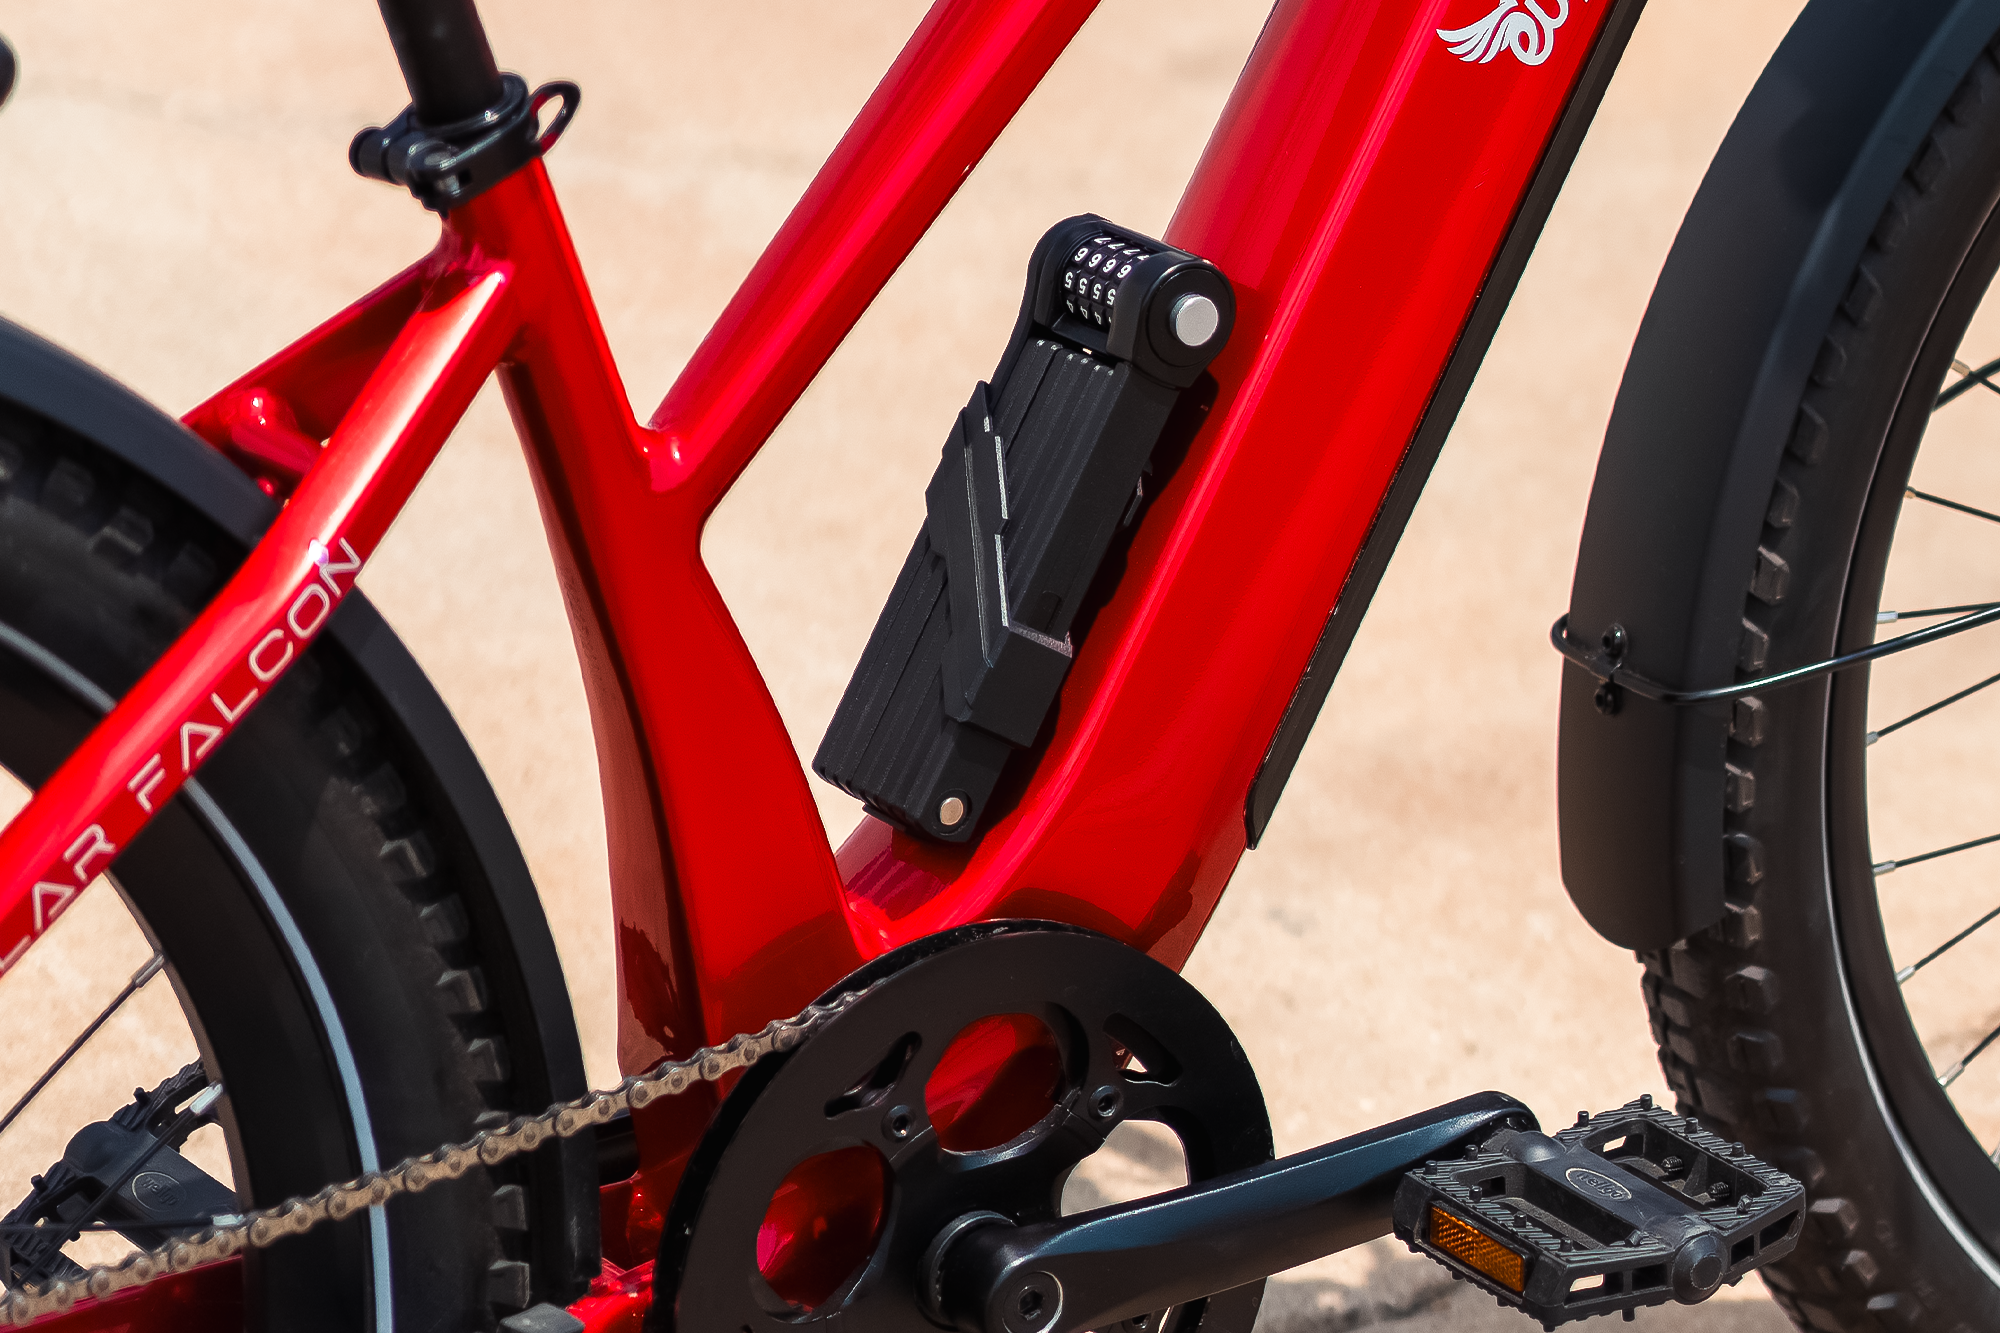 Keep your bike safe on the road and avoid theft with this combination steel folding lock, great for electric bikes and more.